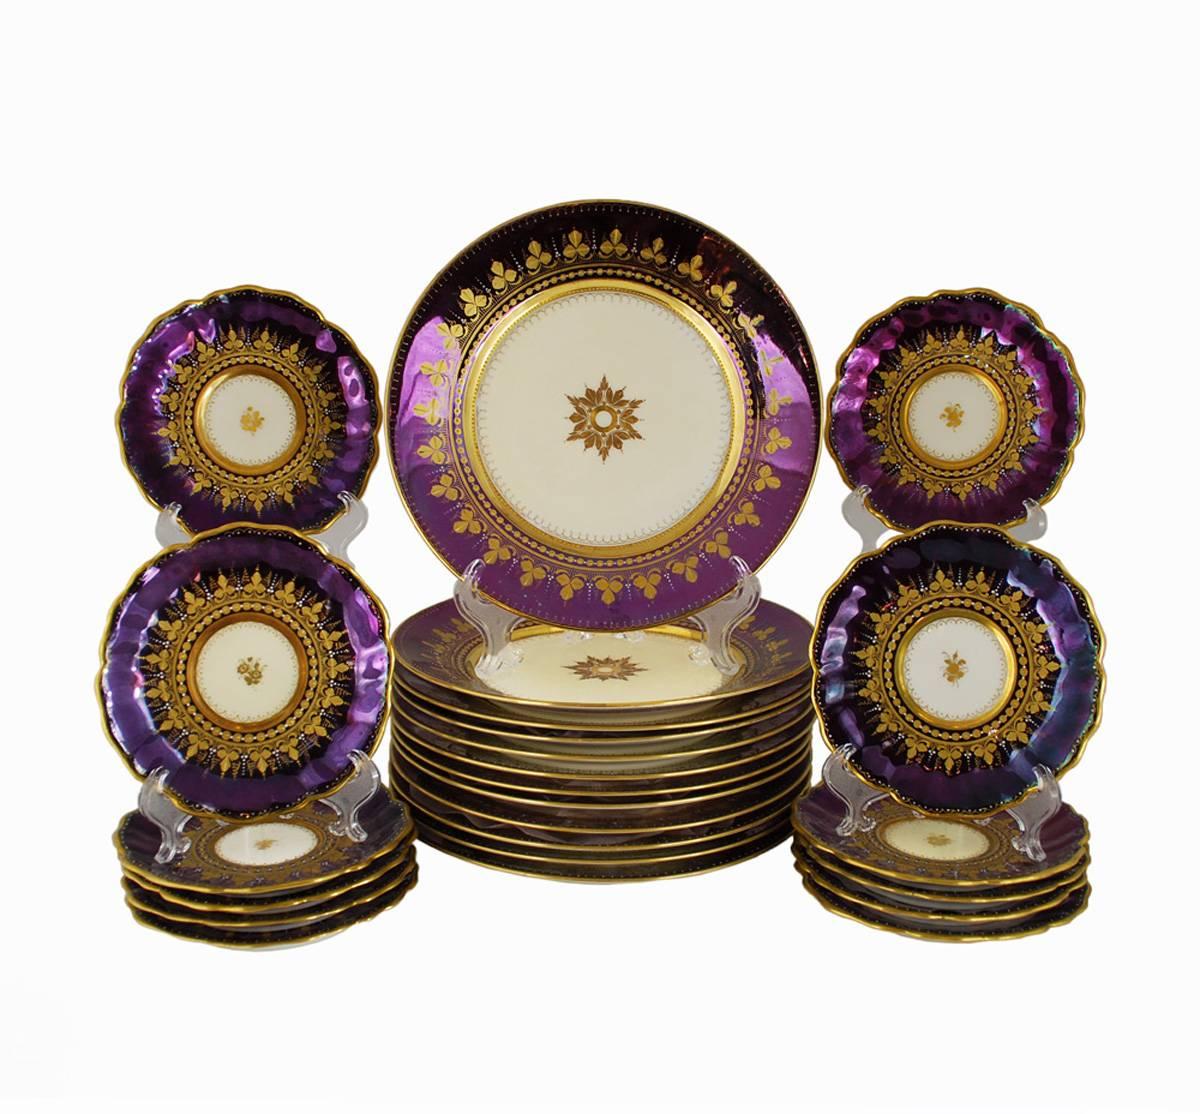 Spectacular porcelain Dresden hand painted set featuring 10 dessert plates, 10 footed cups and 10 saucers.

Each item has a deep, lustrous purple ground color and contrasting bright gilt work with solid bands, repeating leaf motif and raised gilt